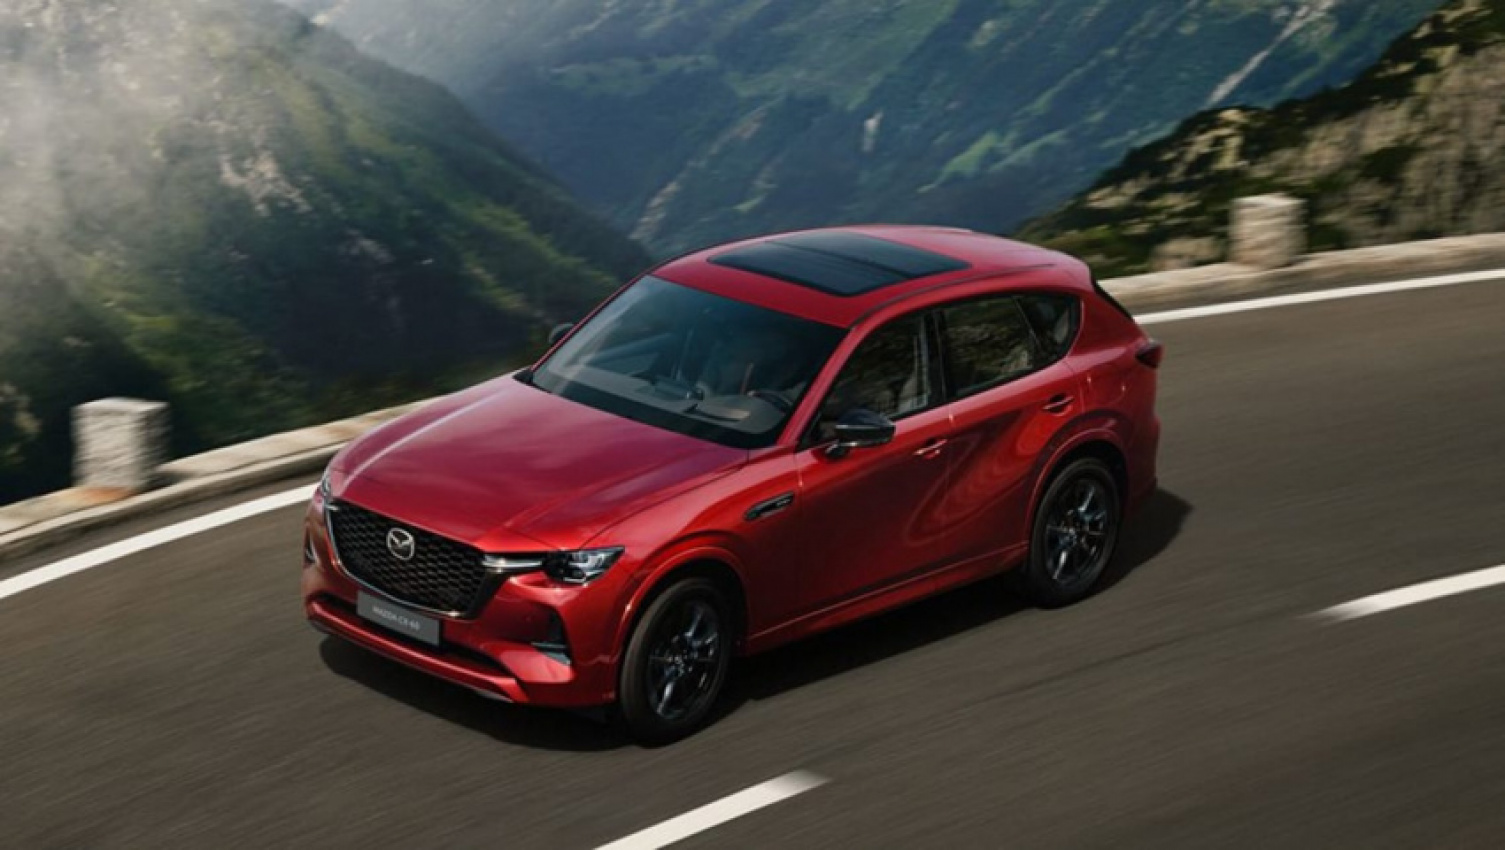 autos, bmw, cars, mazda, mercedes-benz, family cars, green cars, hybrid cars, mazda cx-60, mazda cx-60 2022, mazda news, mazda suv range, mercedes, plug-in hybrid, prestige & luxury cars, can mazda take on bmw and mercedes-benz? why the 2022 mazda cx-60 is pushing the japanese brand into direct competition with premium brands